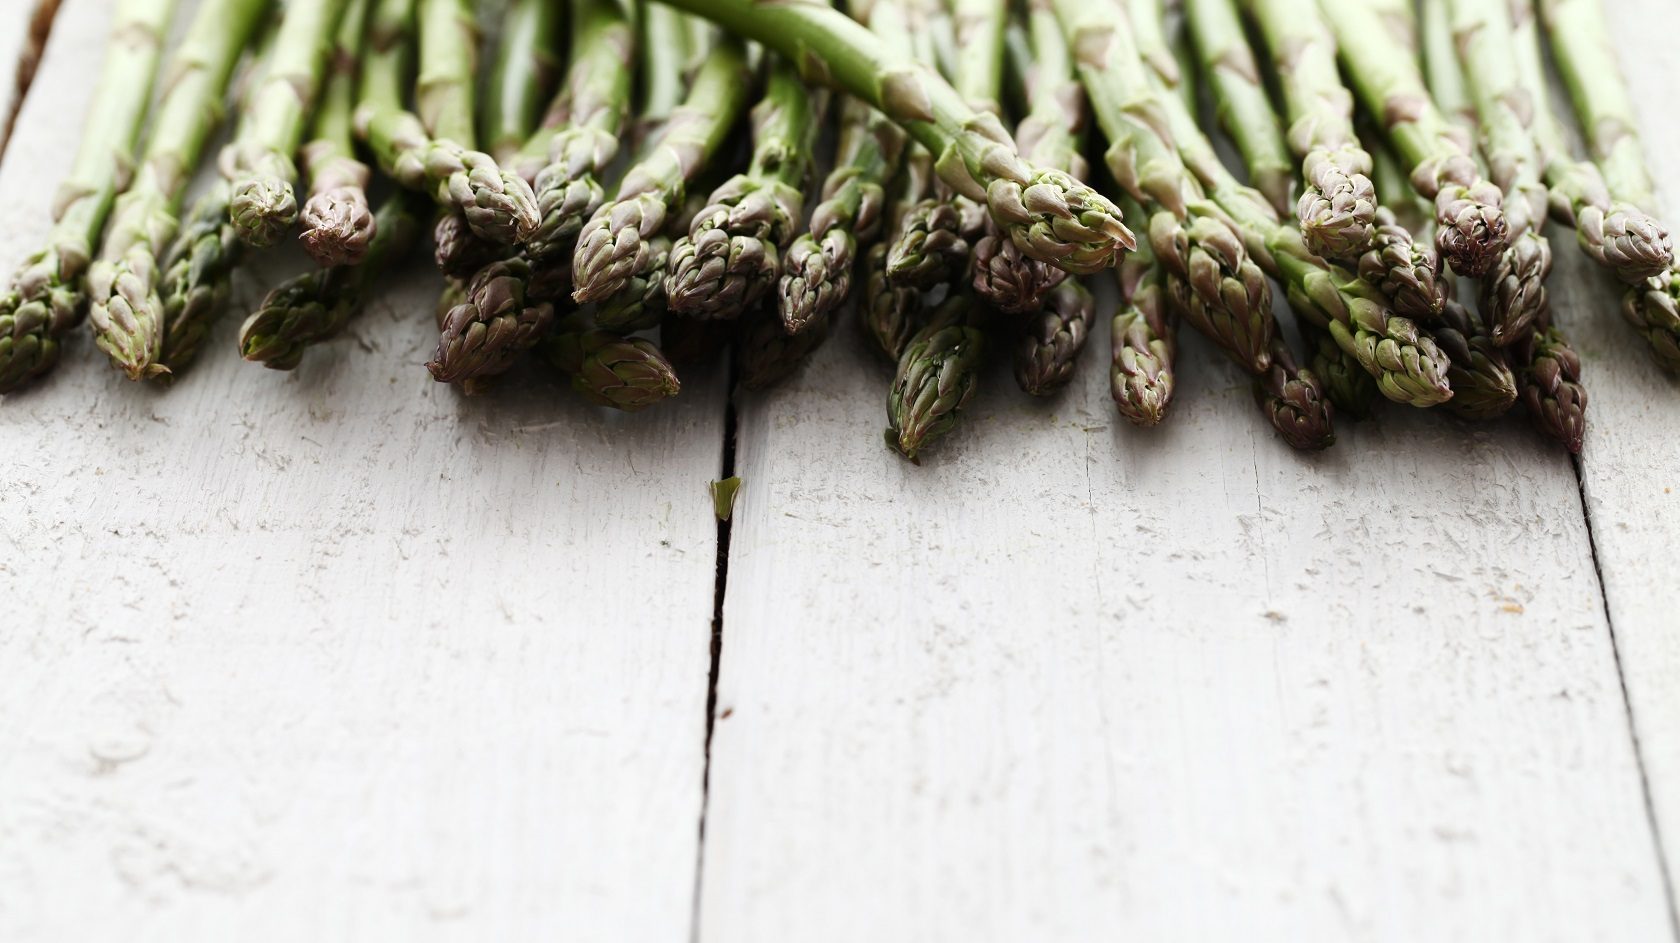 Asparagus on a wooden board